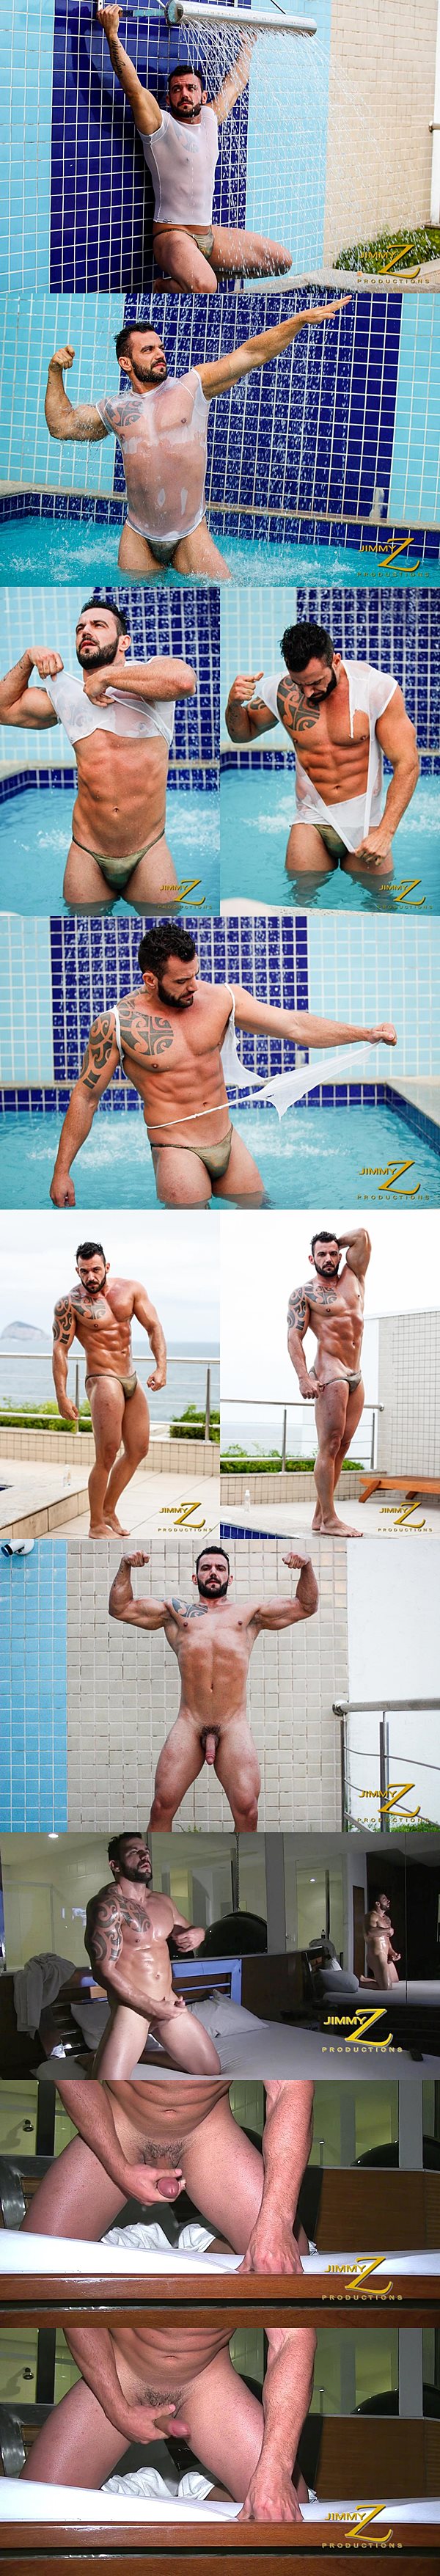 Hot Brazilian muscle hunk Gustavo shows off his hot naked muscled body before he jerks off in Pool Time at Jimmyzproductions